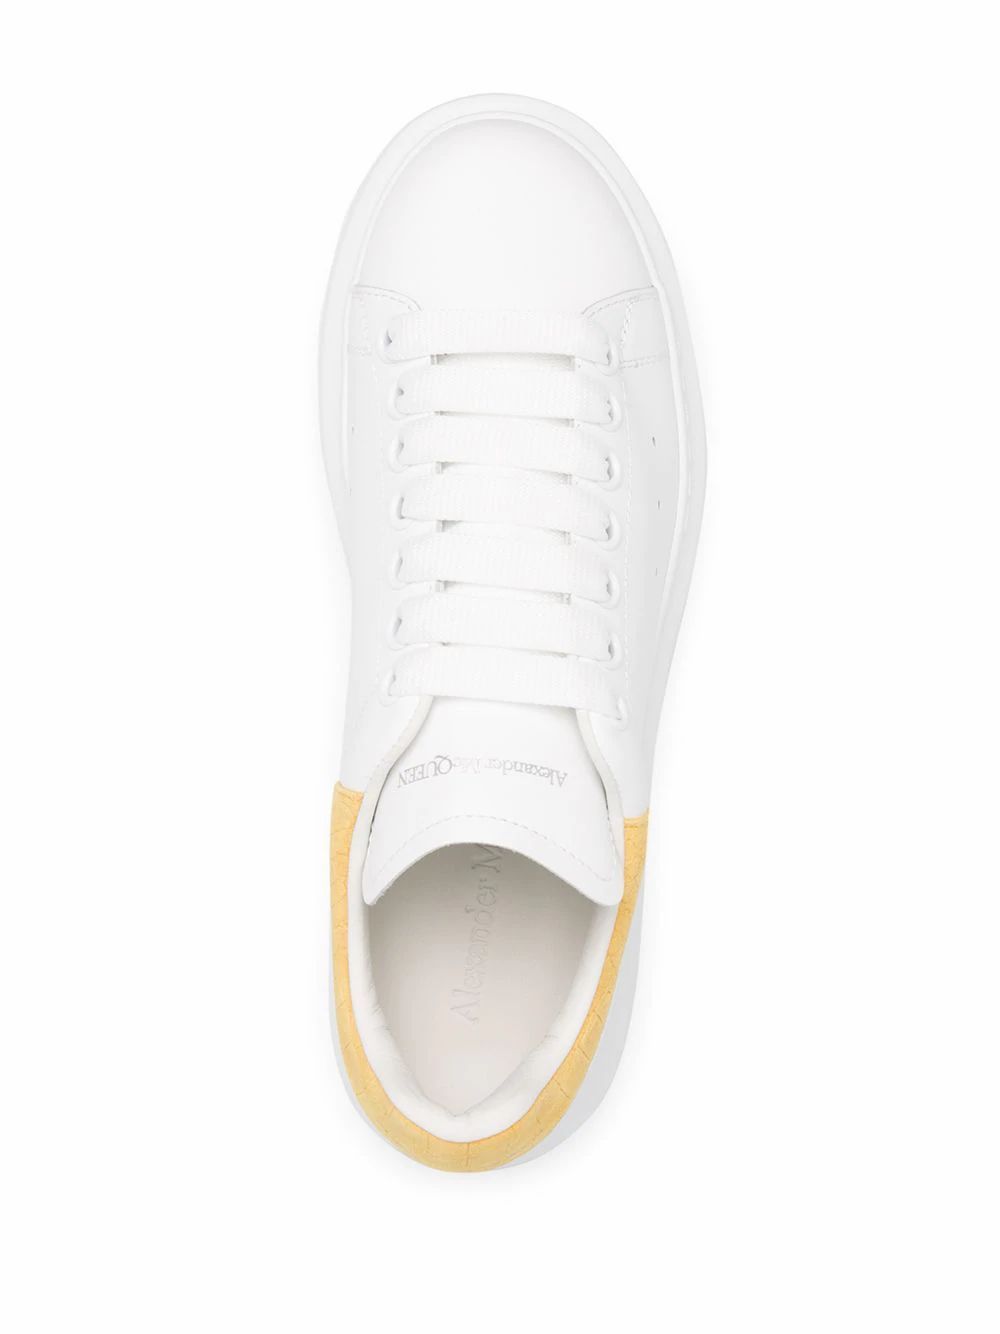 SNEAKERS ALEXANDER MCQUEEN, LEATHER 100%, color WHITE, Rubber sole, SS21, product code 650788WHZ4K9718